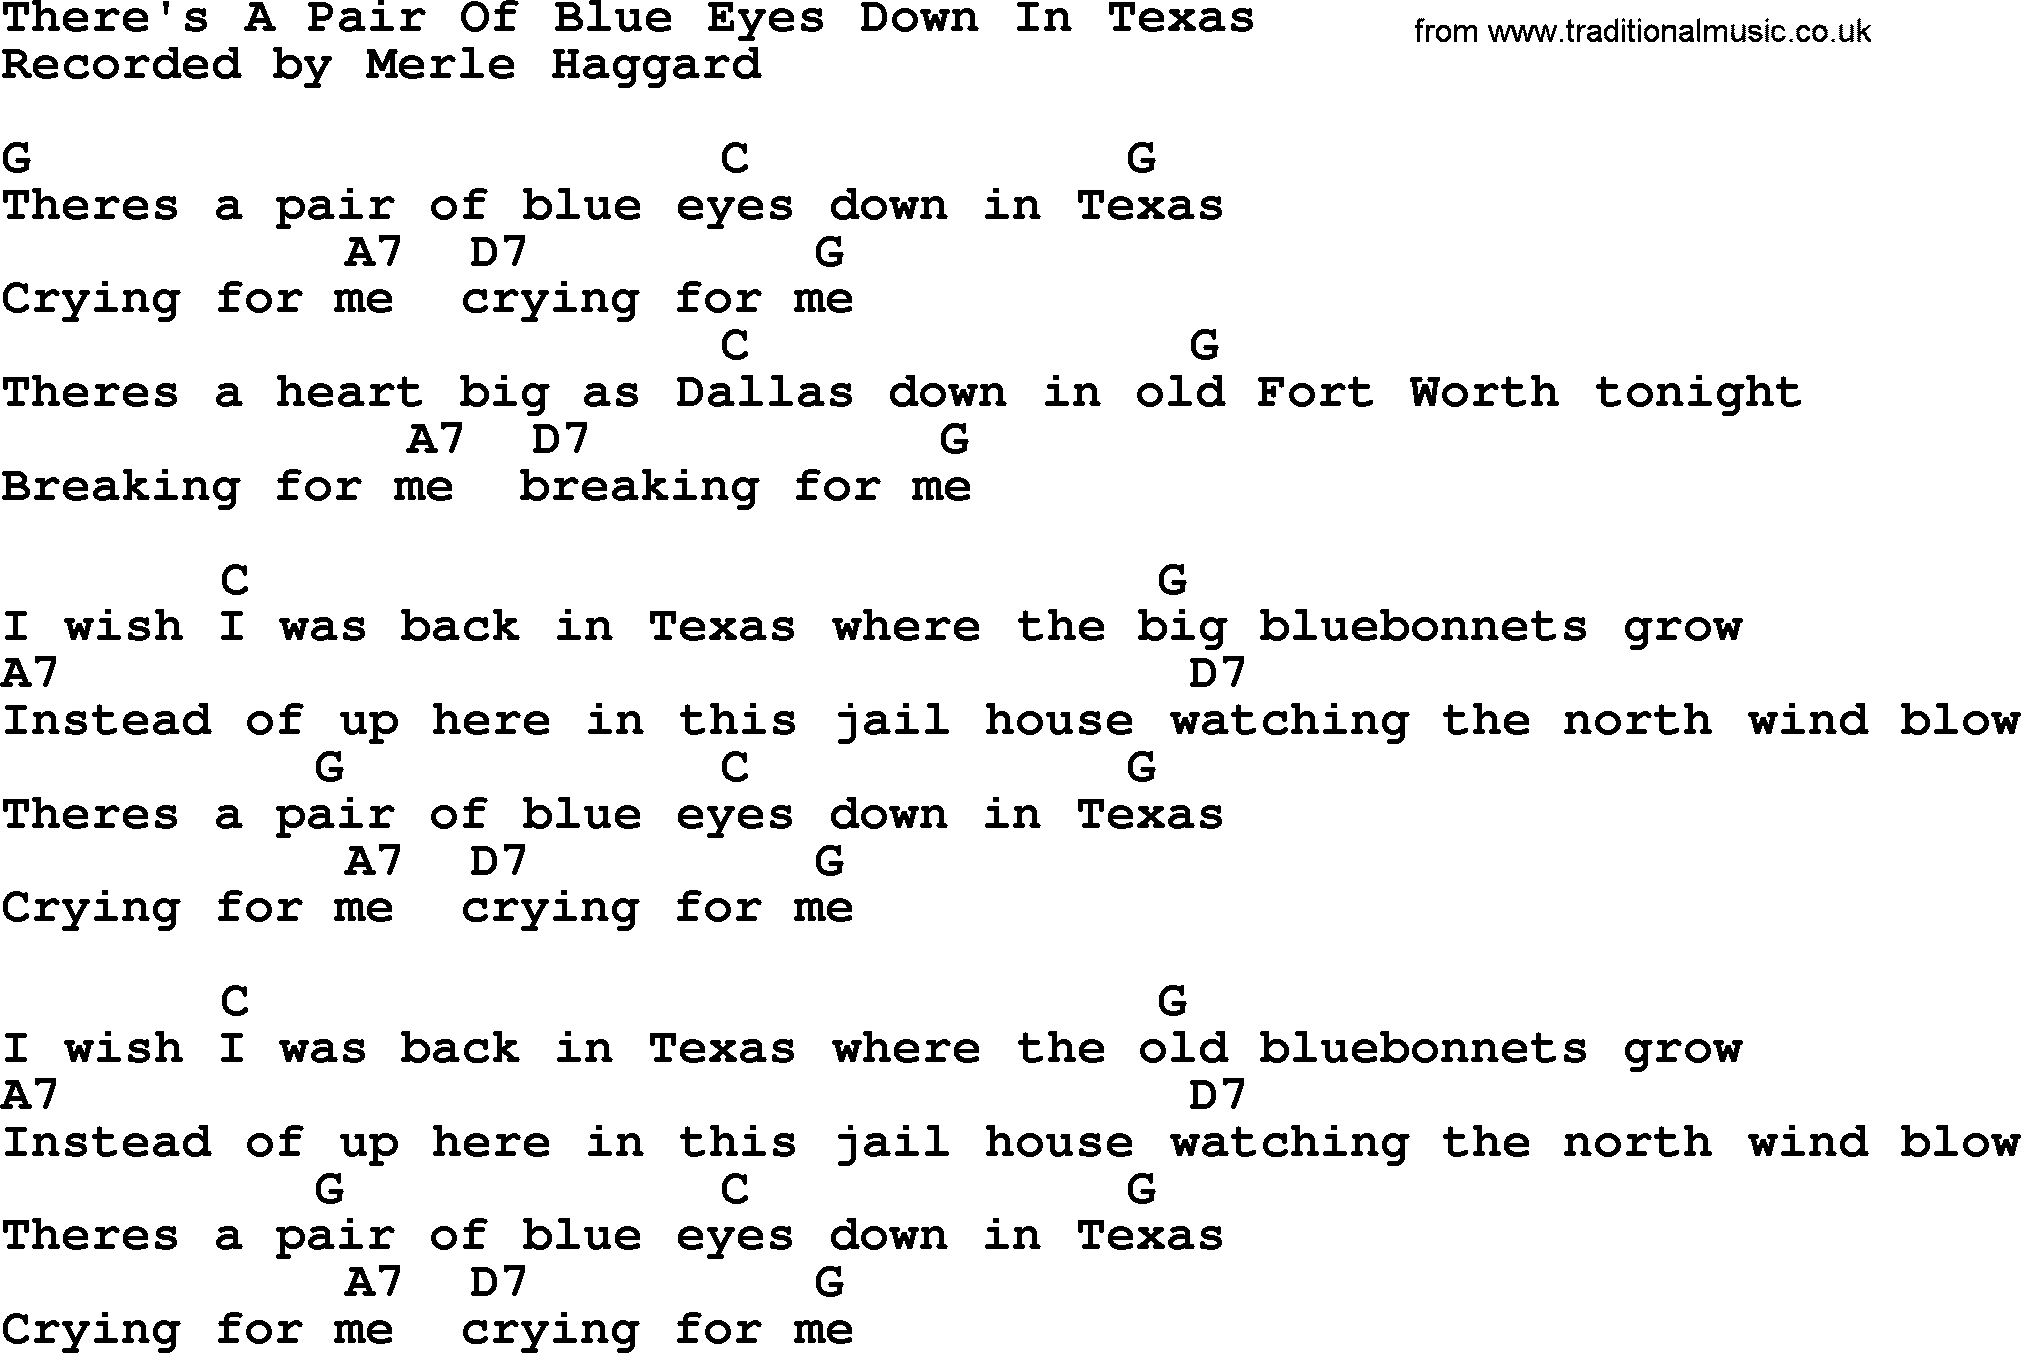 Merle Haggard song: There's A Pair Of Blue Eyes Down In Texas, lyrics and chords